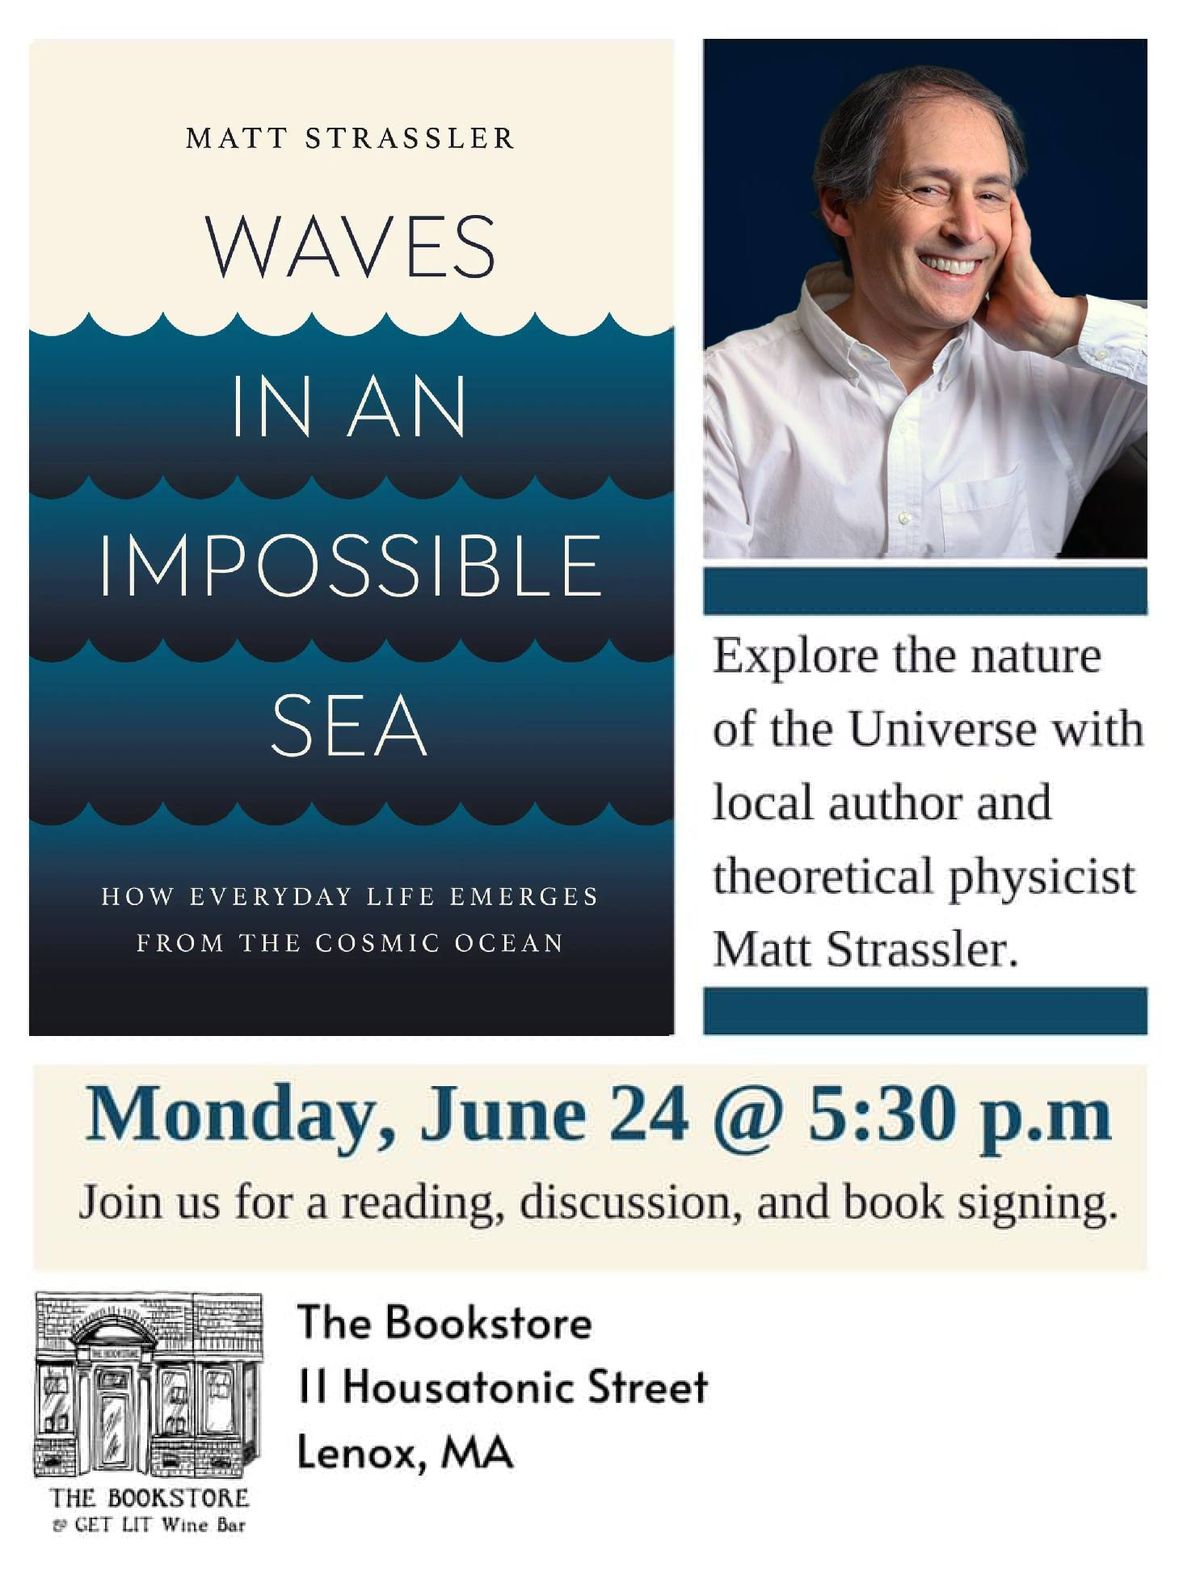 Waves in an Impossible Sea at The Bookstore